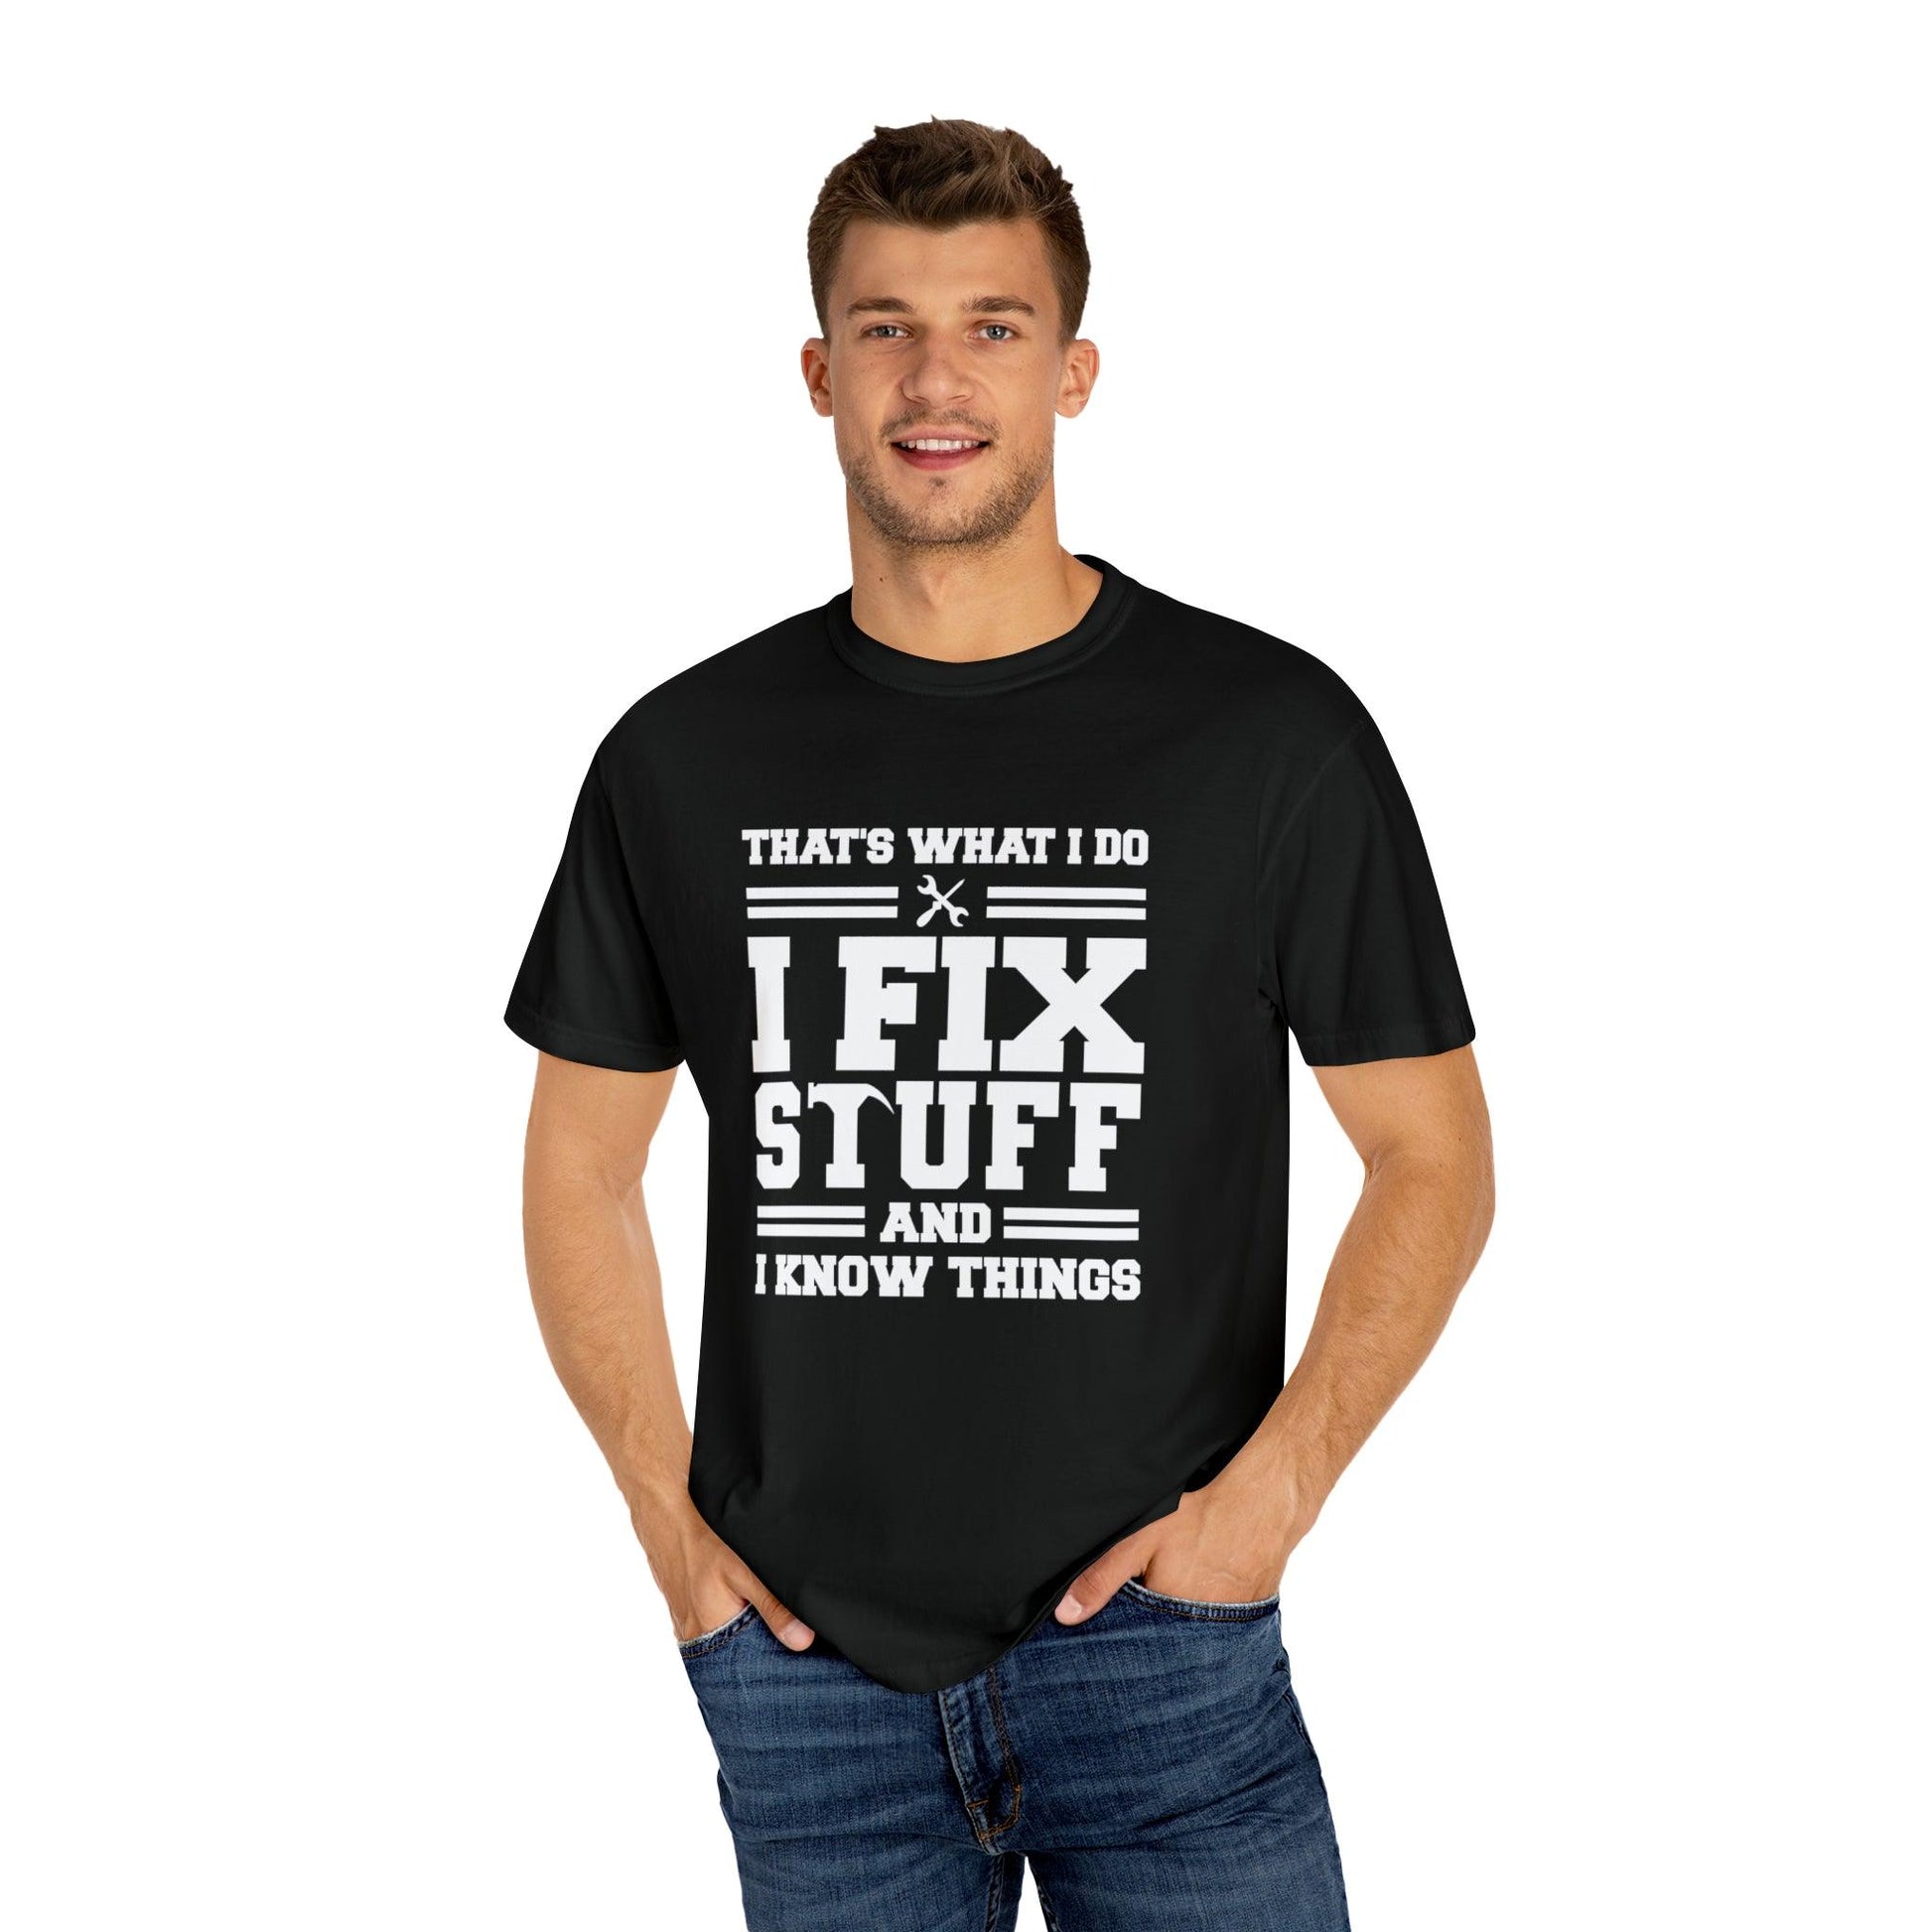 I Fix Stuff and I Know Things" Mastery Tee: Celebrate Your Skills and Knowledge in Style - Pandaize